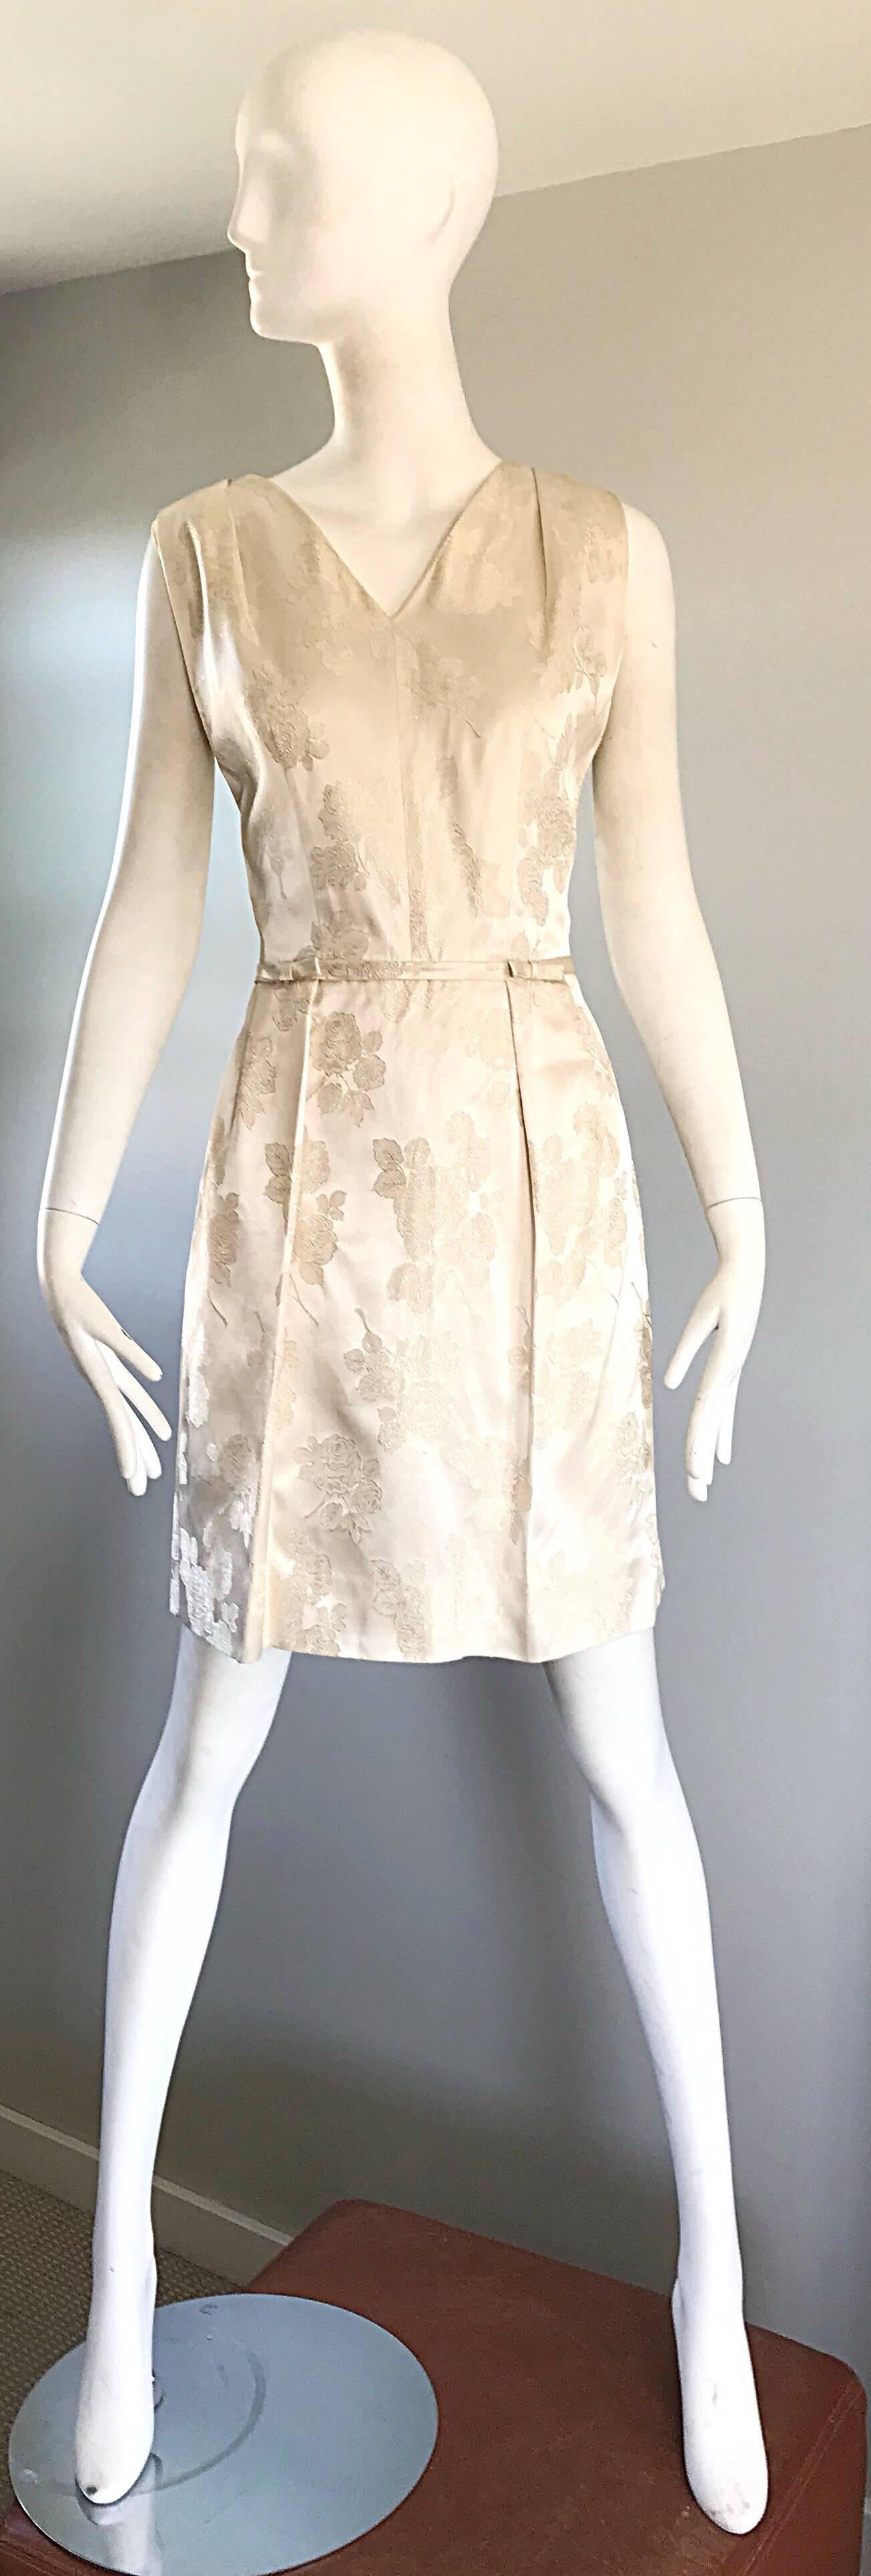 Chic 50s vintage R&K ORIGINALS ivory / off-white silk jacquar sleeveless Dress! Features a luxurious silk jacquard floral silk. Fitted bodice with a forgiving full skirt. Two bows at each side of the waistband. Demi couture quality, with heavy